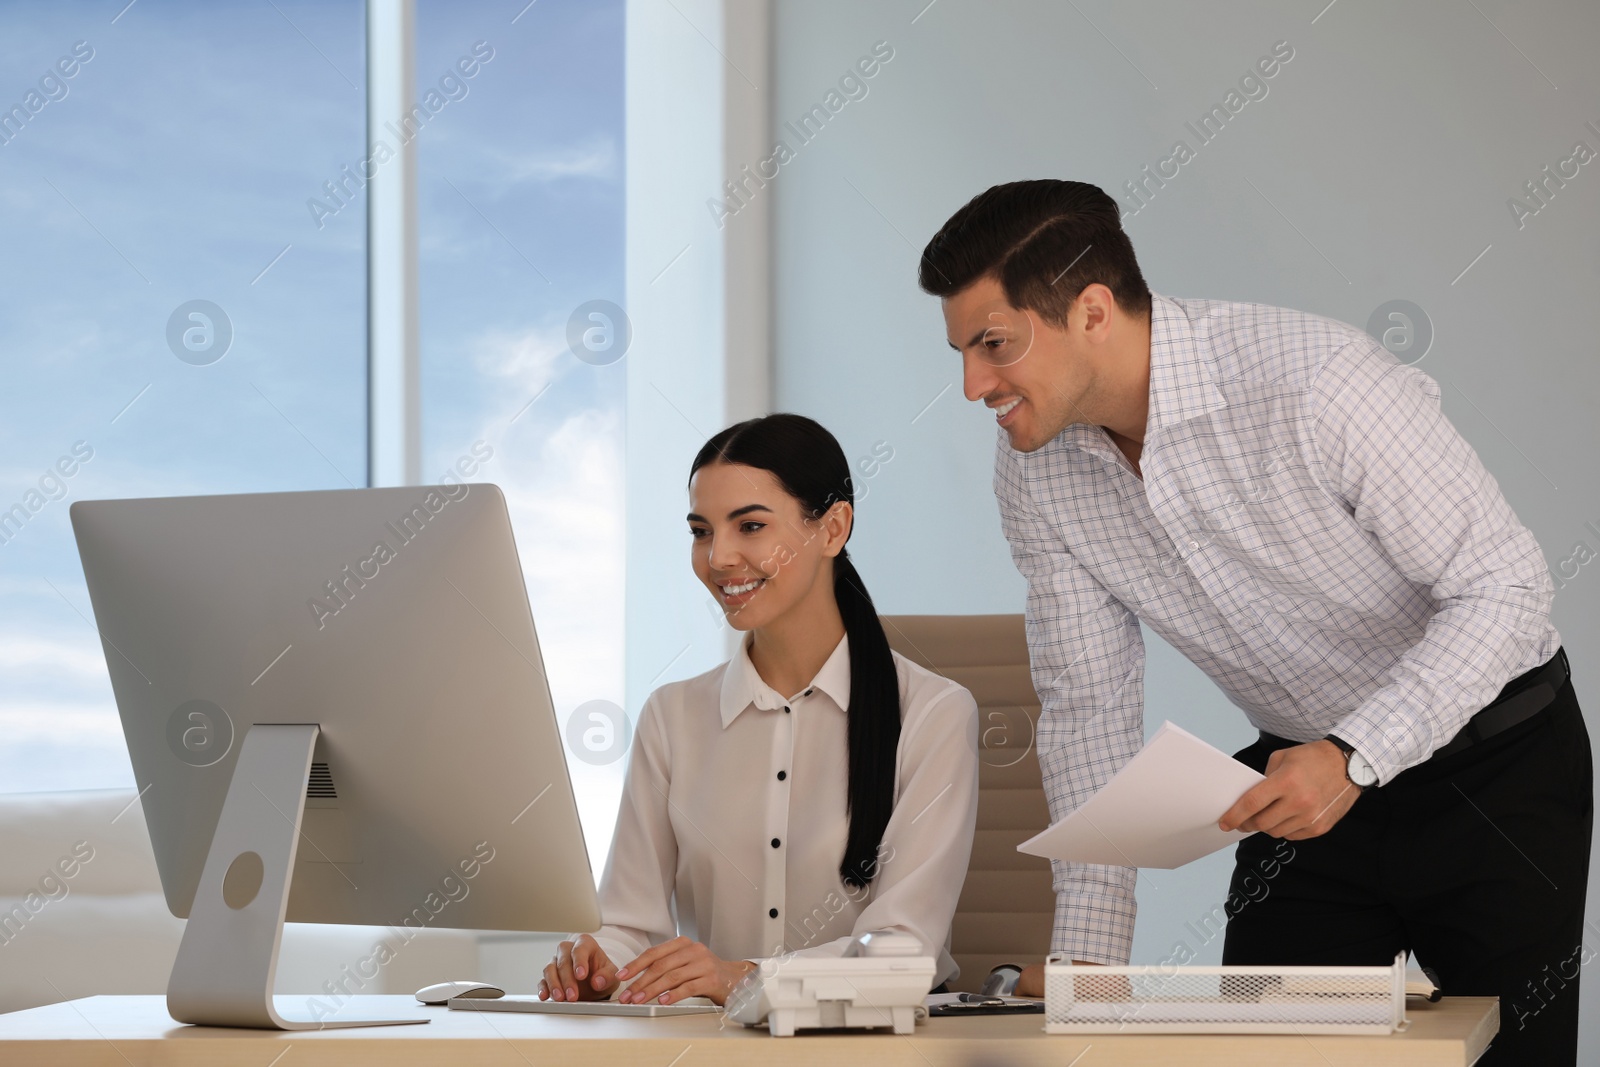 Photo of Secretary and her boss working at table in office